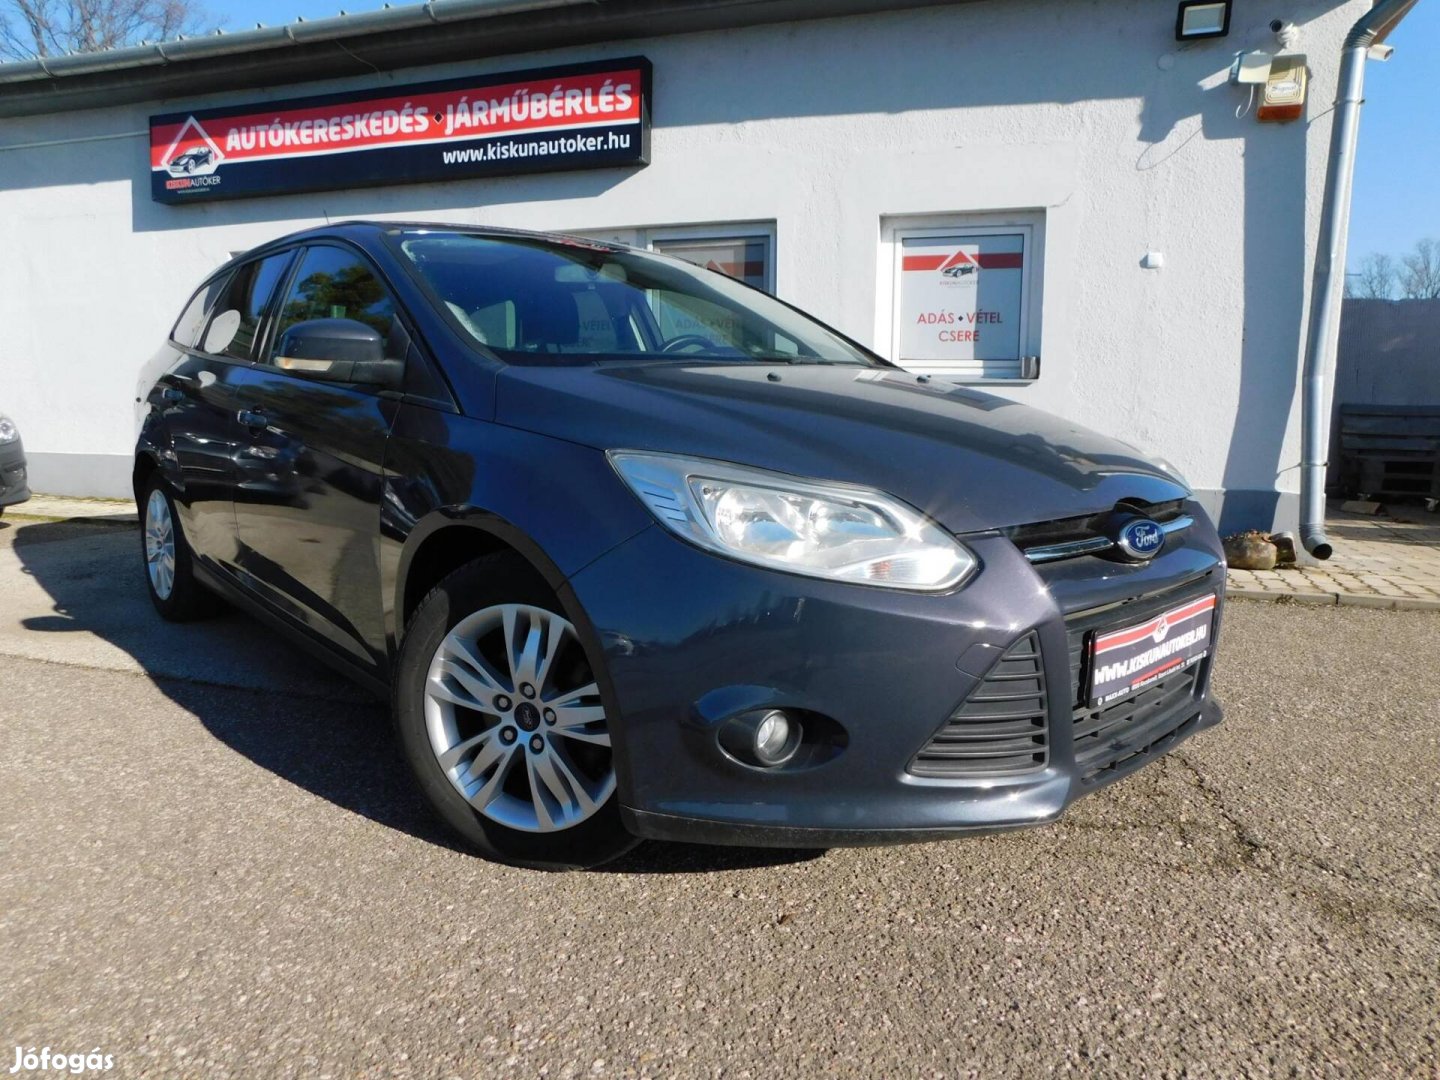 Ford Focus 1.6 TDCi Trend Plus Multikormány. TO...